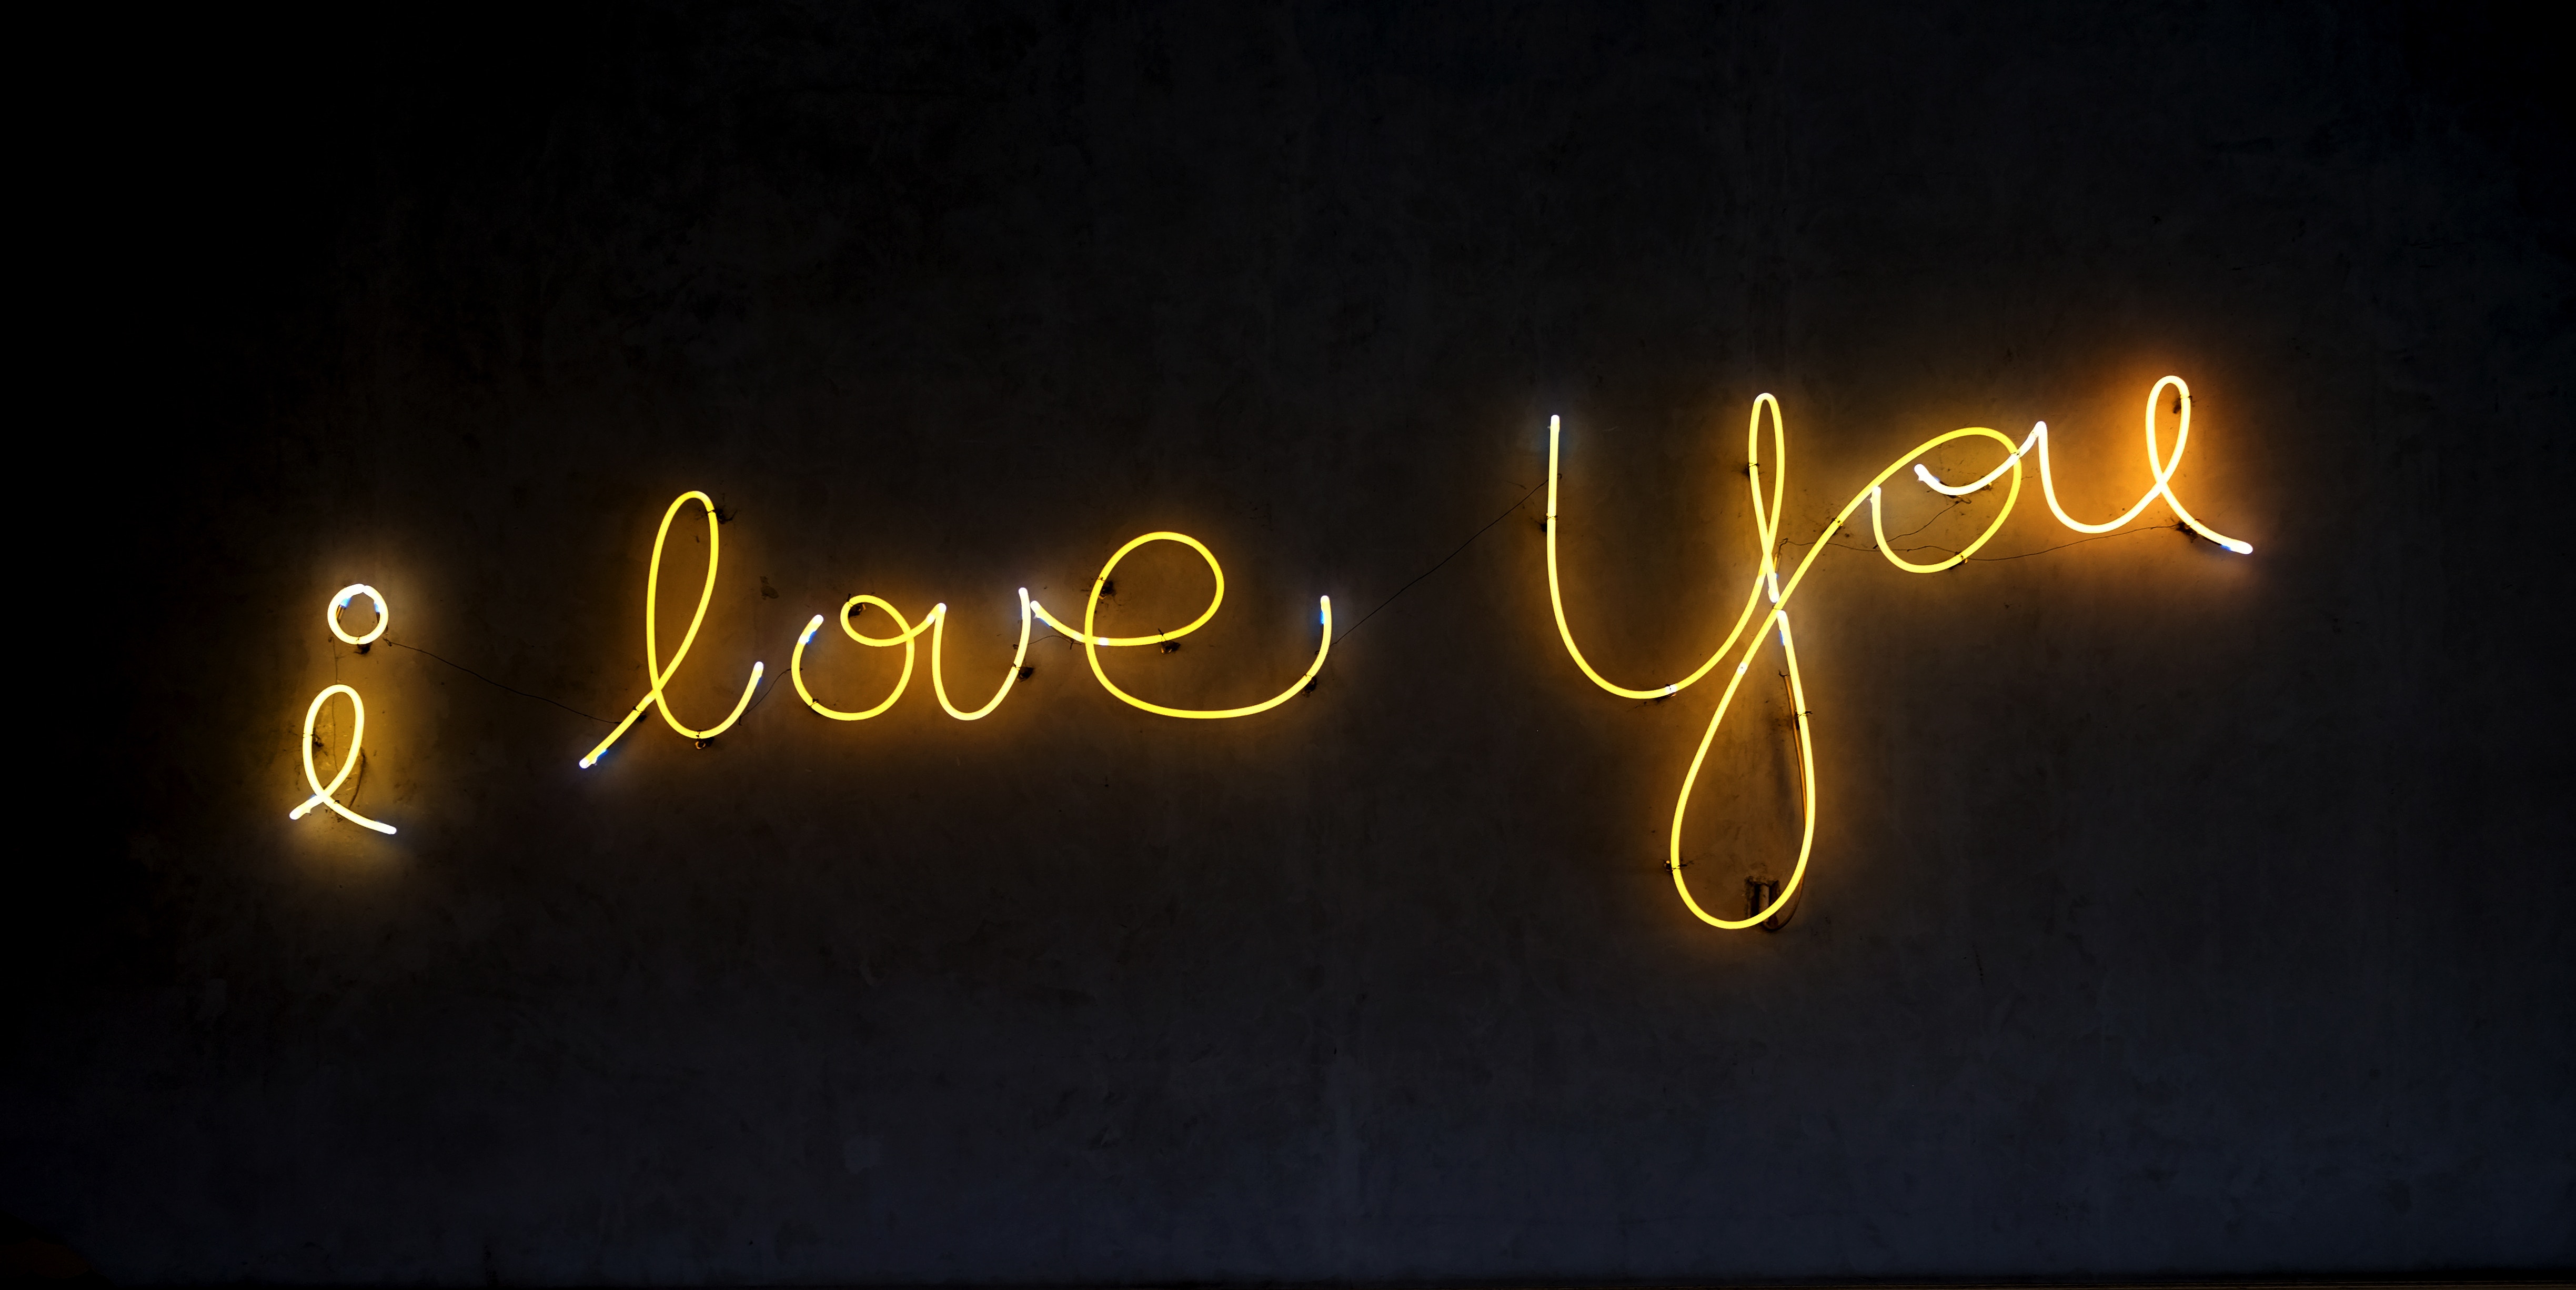 4896x2451 #Free image, #word, #caffe, #dark, #interior, #neon sign, #writing on the wall, #love, #restaurant, #yellow, #bandung, #couple, #indonesia, #black background, #wall sign, #neon, #sign, #i love you HD Wallpaper